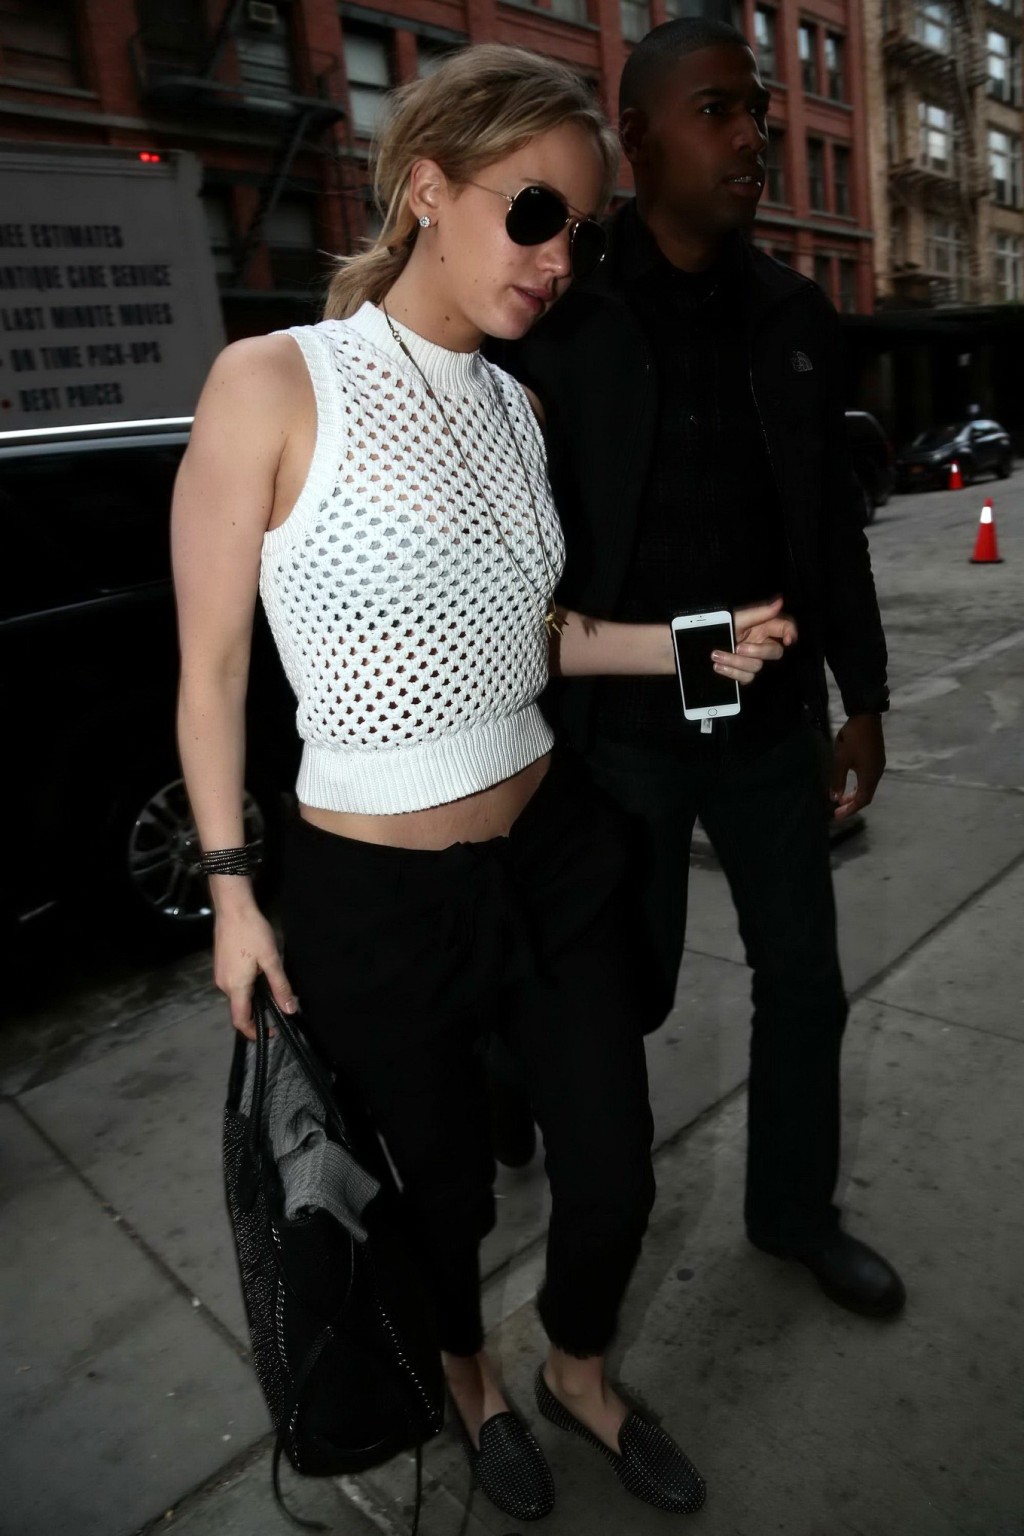 Vollbusig jennifer lawrence see through to bra out in nyc
 #75165330